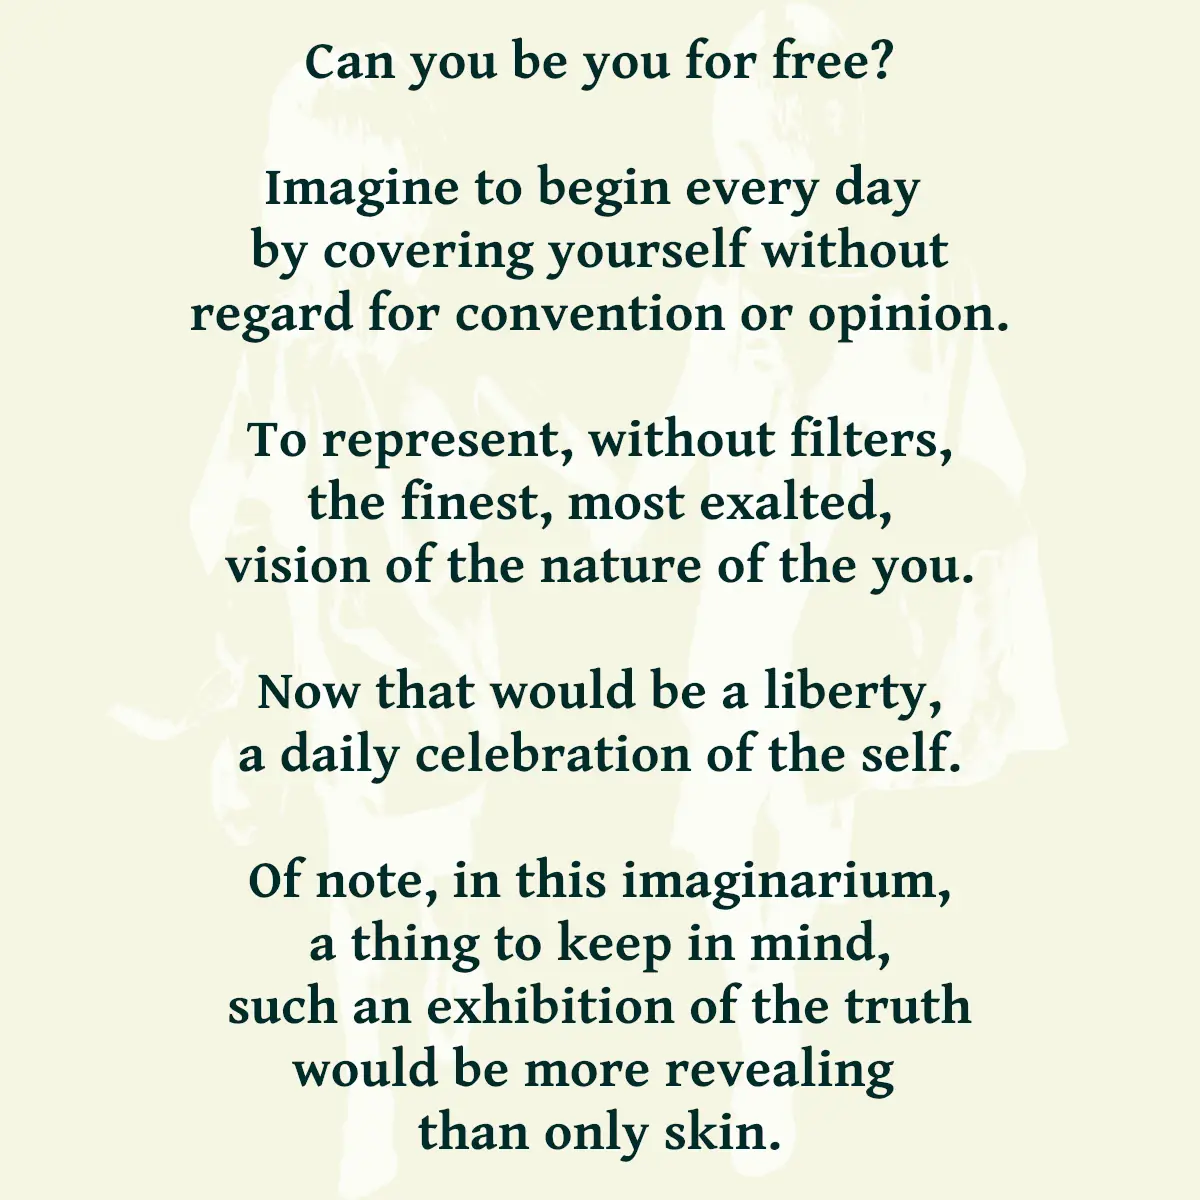 Can you be you for free? Imagine to begin every day by covering yourself without regard for convention or opinion. To represent, without filters, the finest, most exalted, vision of the nature of the you. Now that would be a liberty, a daily celebration of the self. Of note, in this imaginarium, a thing to keep in mind, such an exhibition of the truth would be more revealing than only skin.